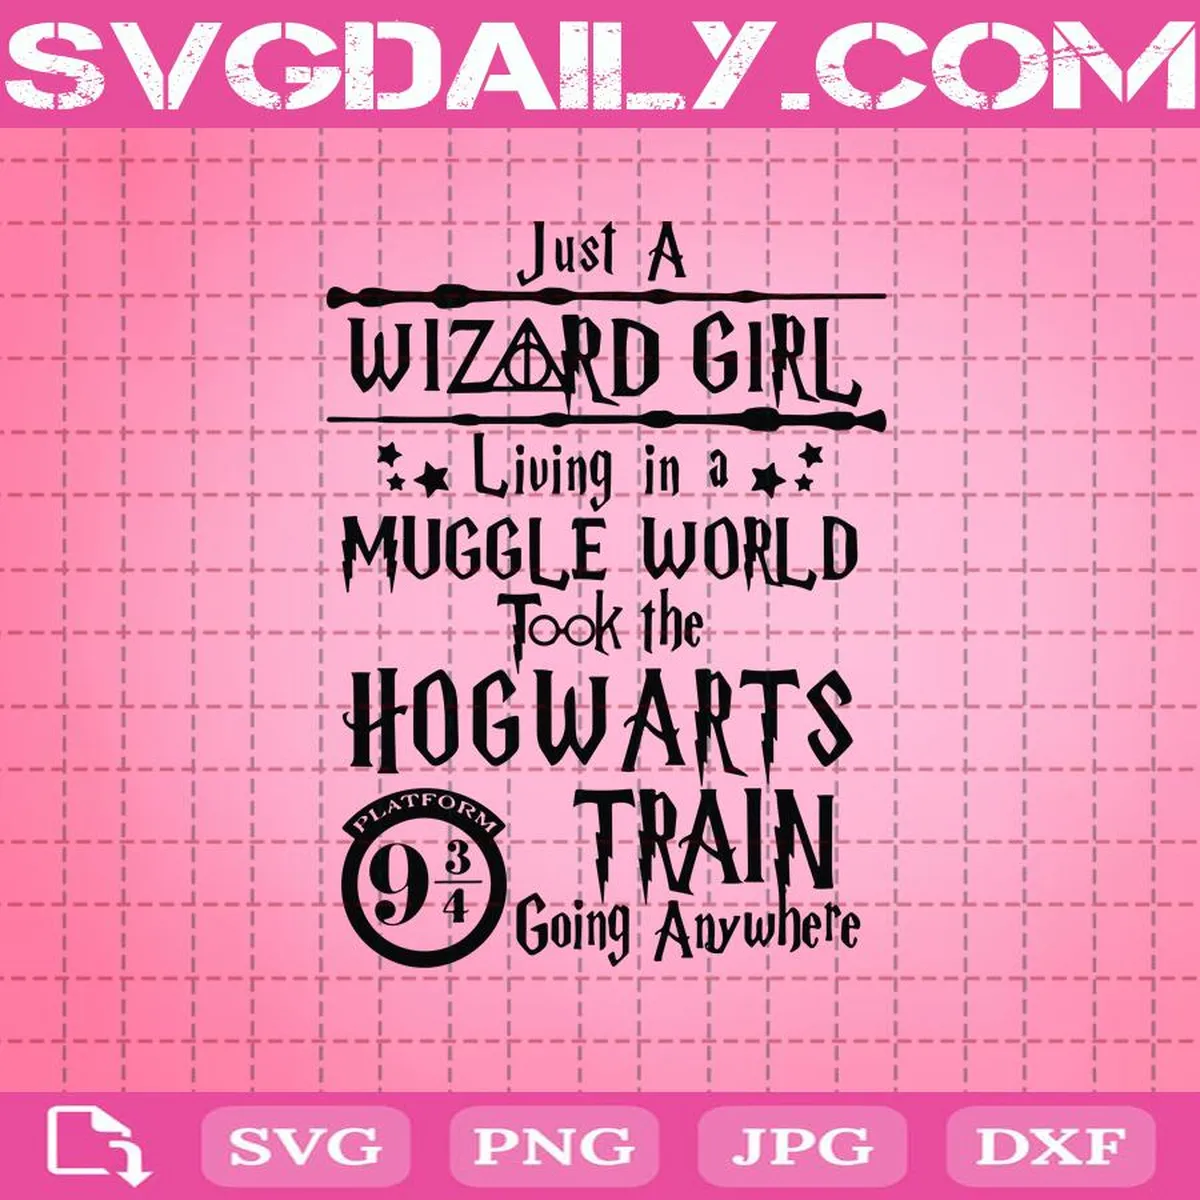 Just A Wizard Girl Living In A Muggle World Took The Hogwarts Train Going Any Where Svg, Harry Potter Svg, Hogwarts Svg